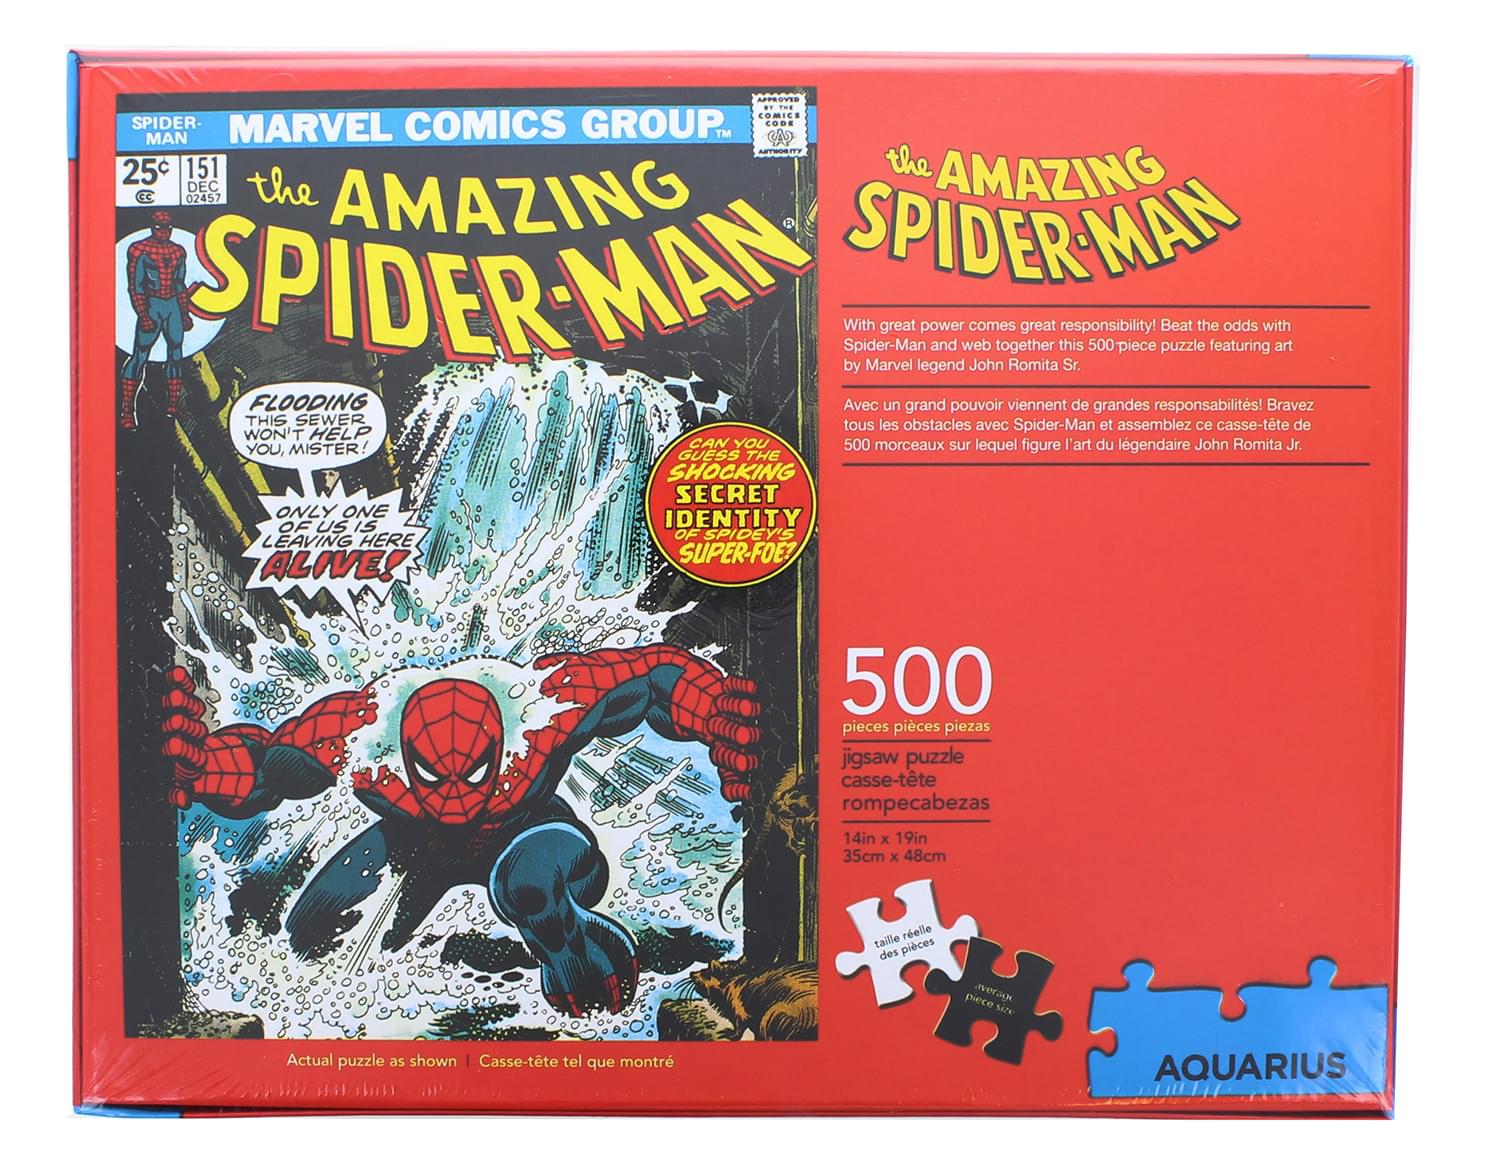 Marvel Spider-Man #151 Comic Cover 500 Piece Jigsaw Puzzle